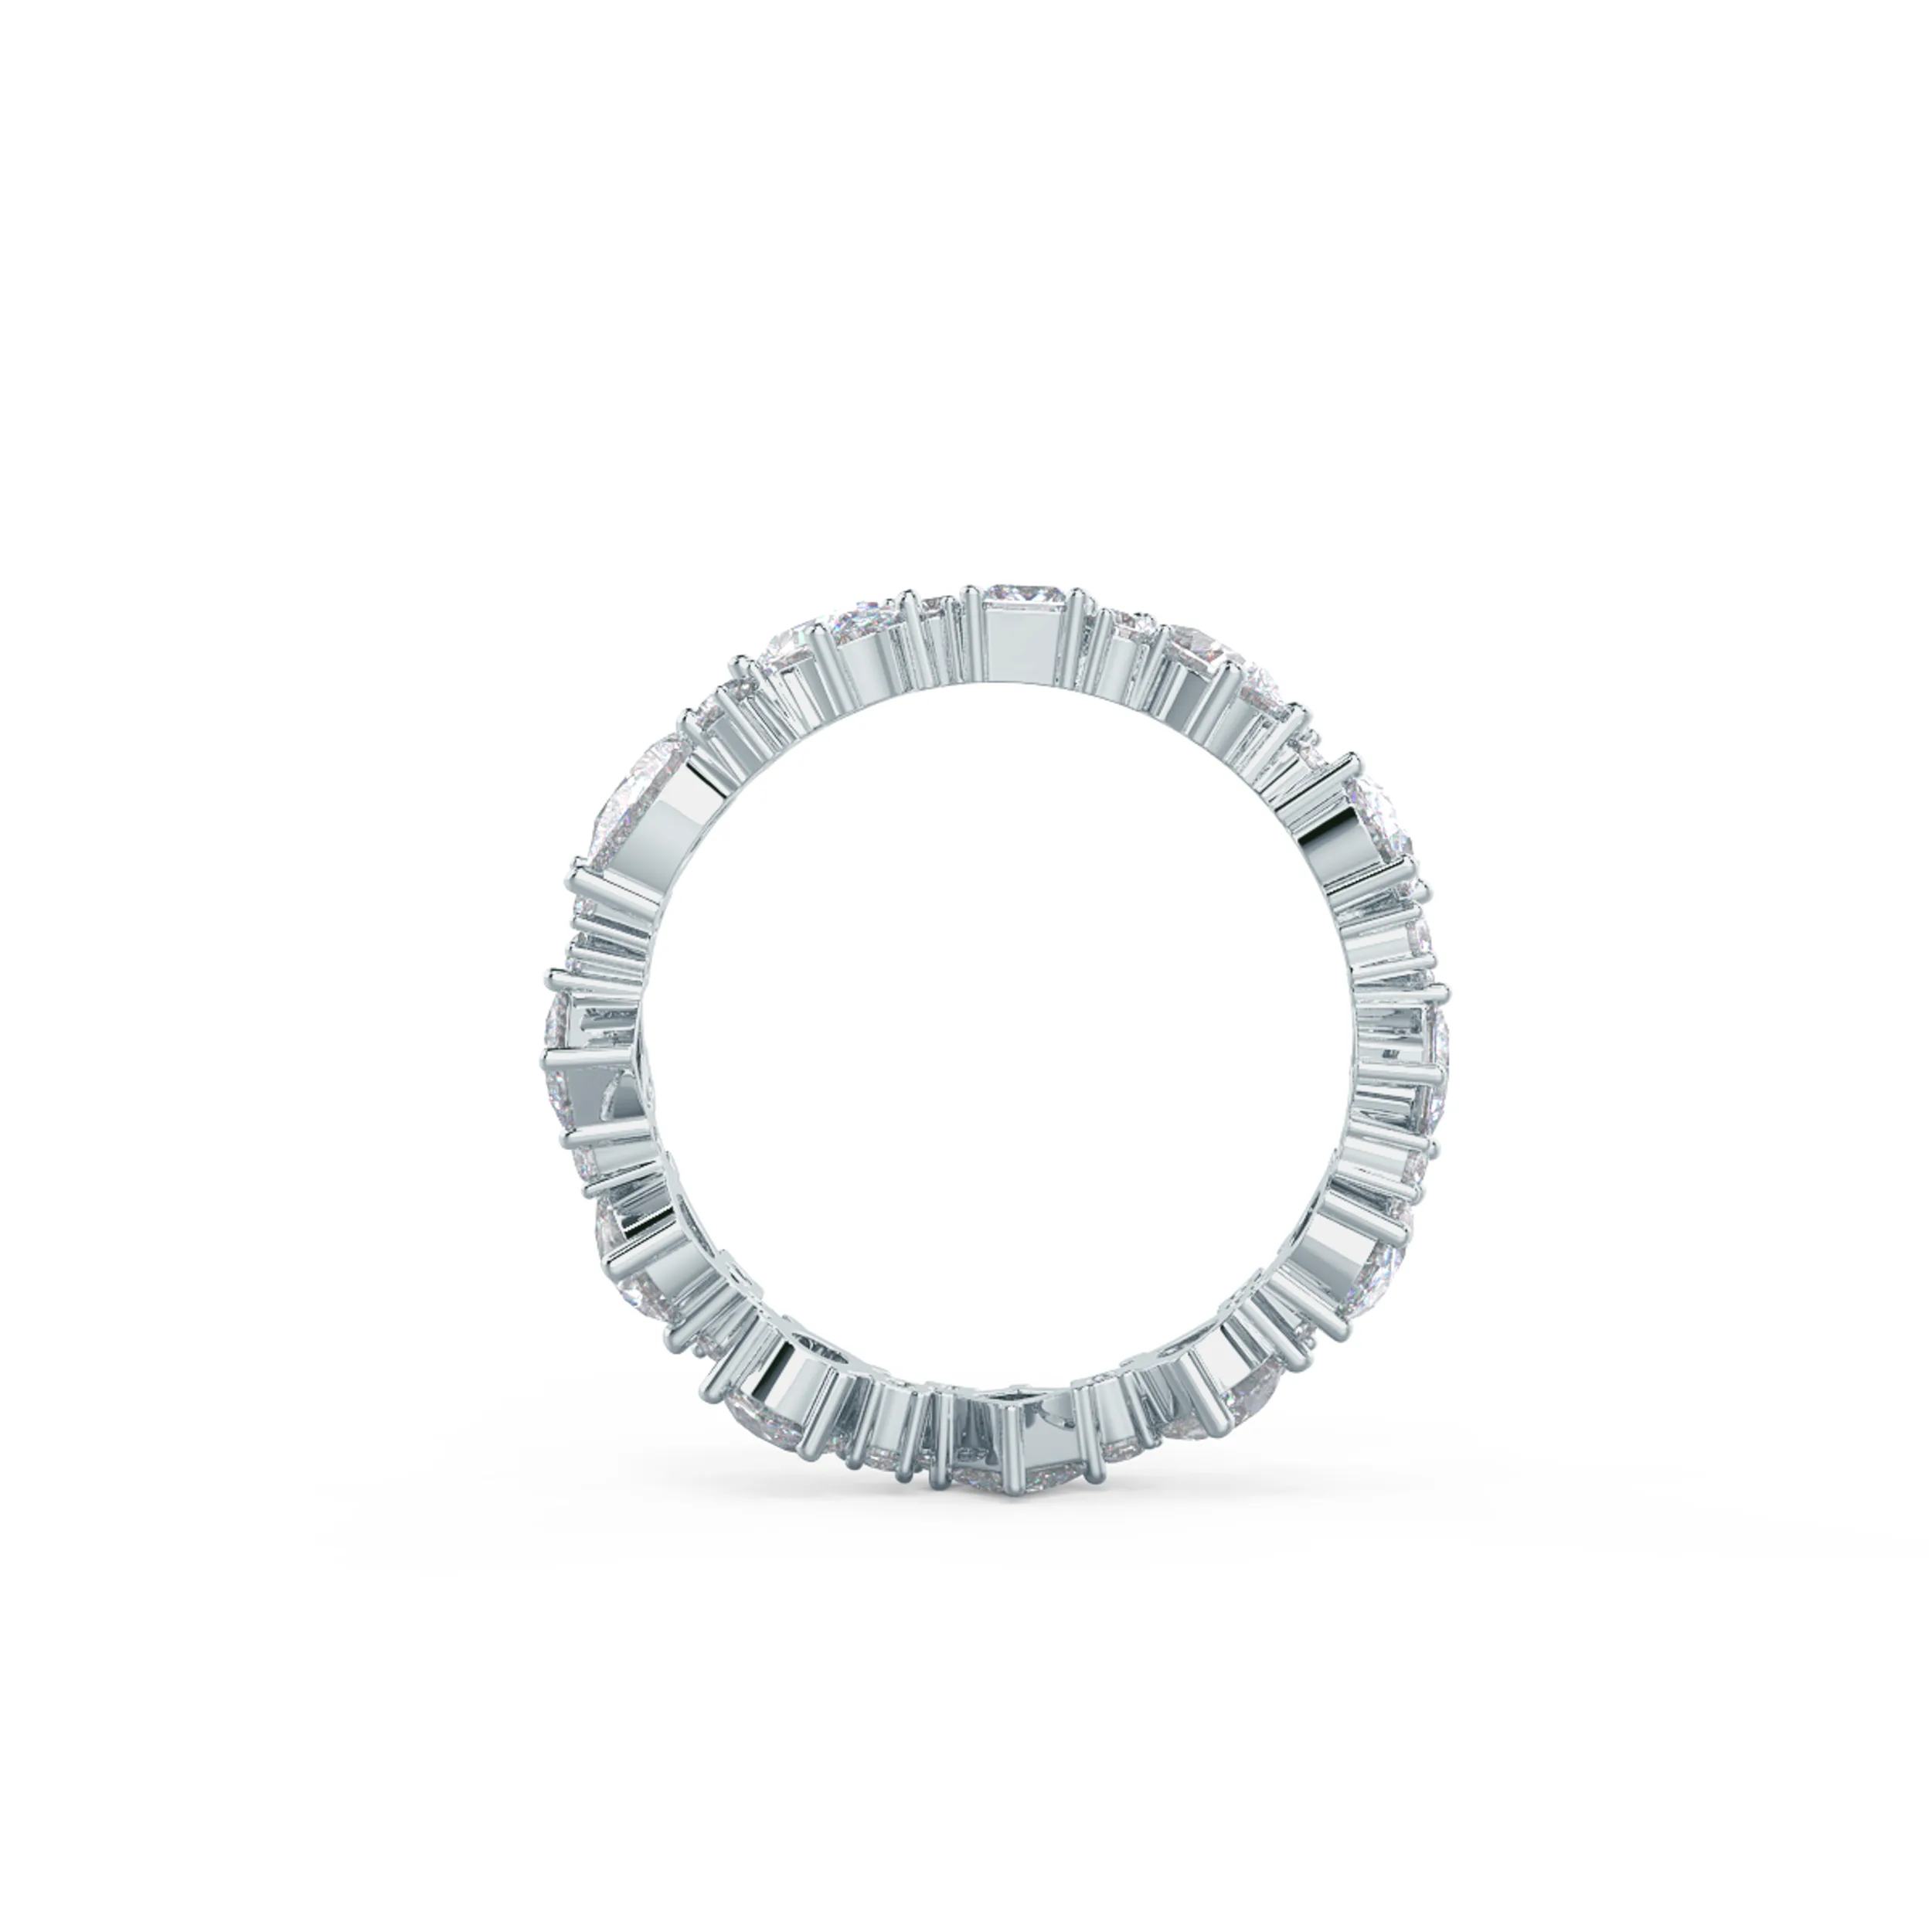 18kt White Gold Kelsey Eternity Band featuring Hand Selected 2.0 ct Diamonds (Profile View)